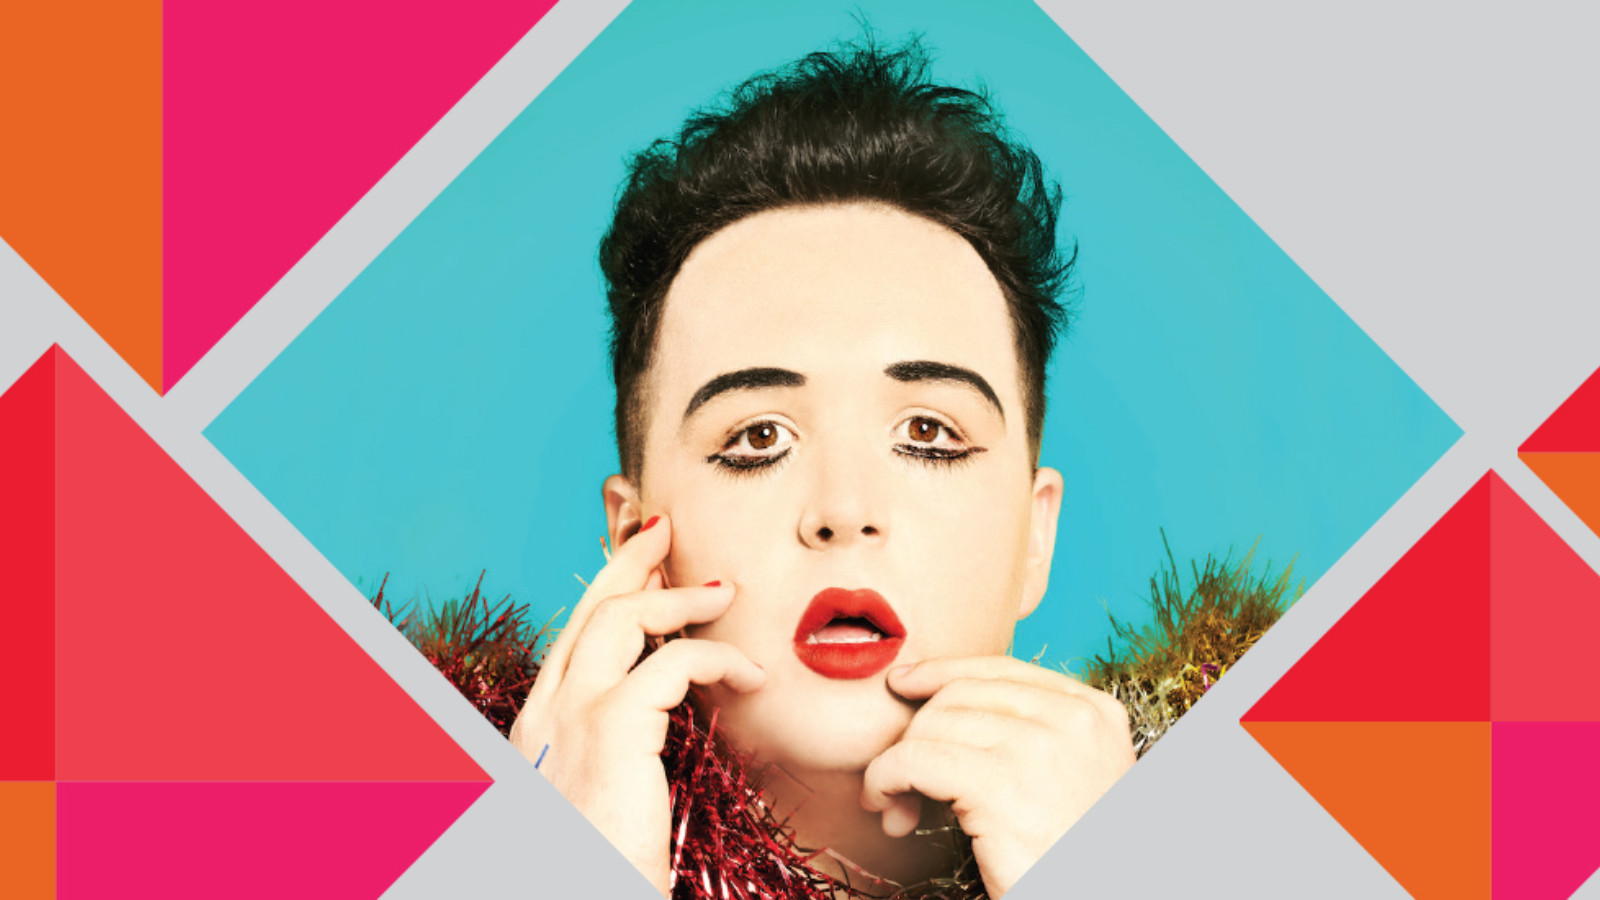 The artist Scottee wears bright red lipstick, false eyelashes and a glittering fluffy jacket against a blue background. This image is set against a graphic design of red, pink, orange and grey.